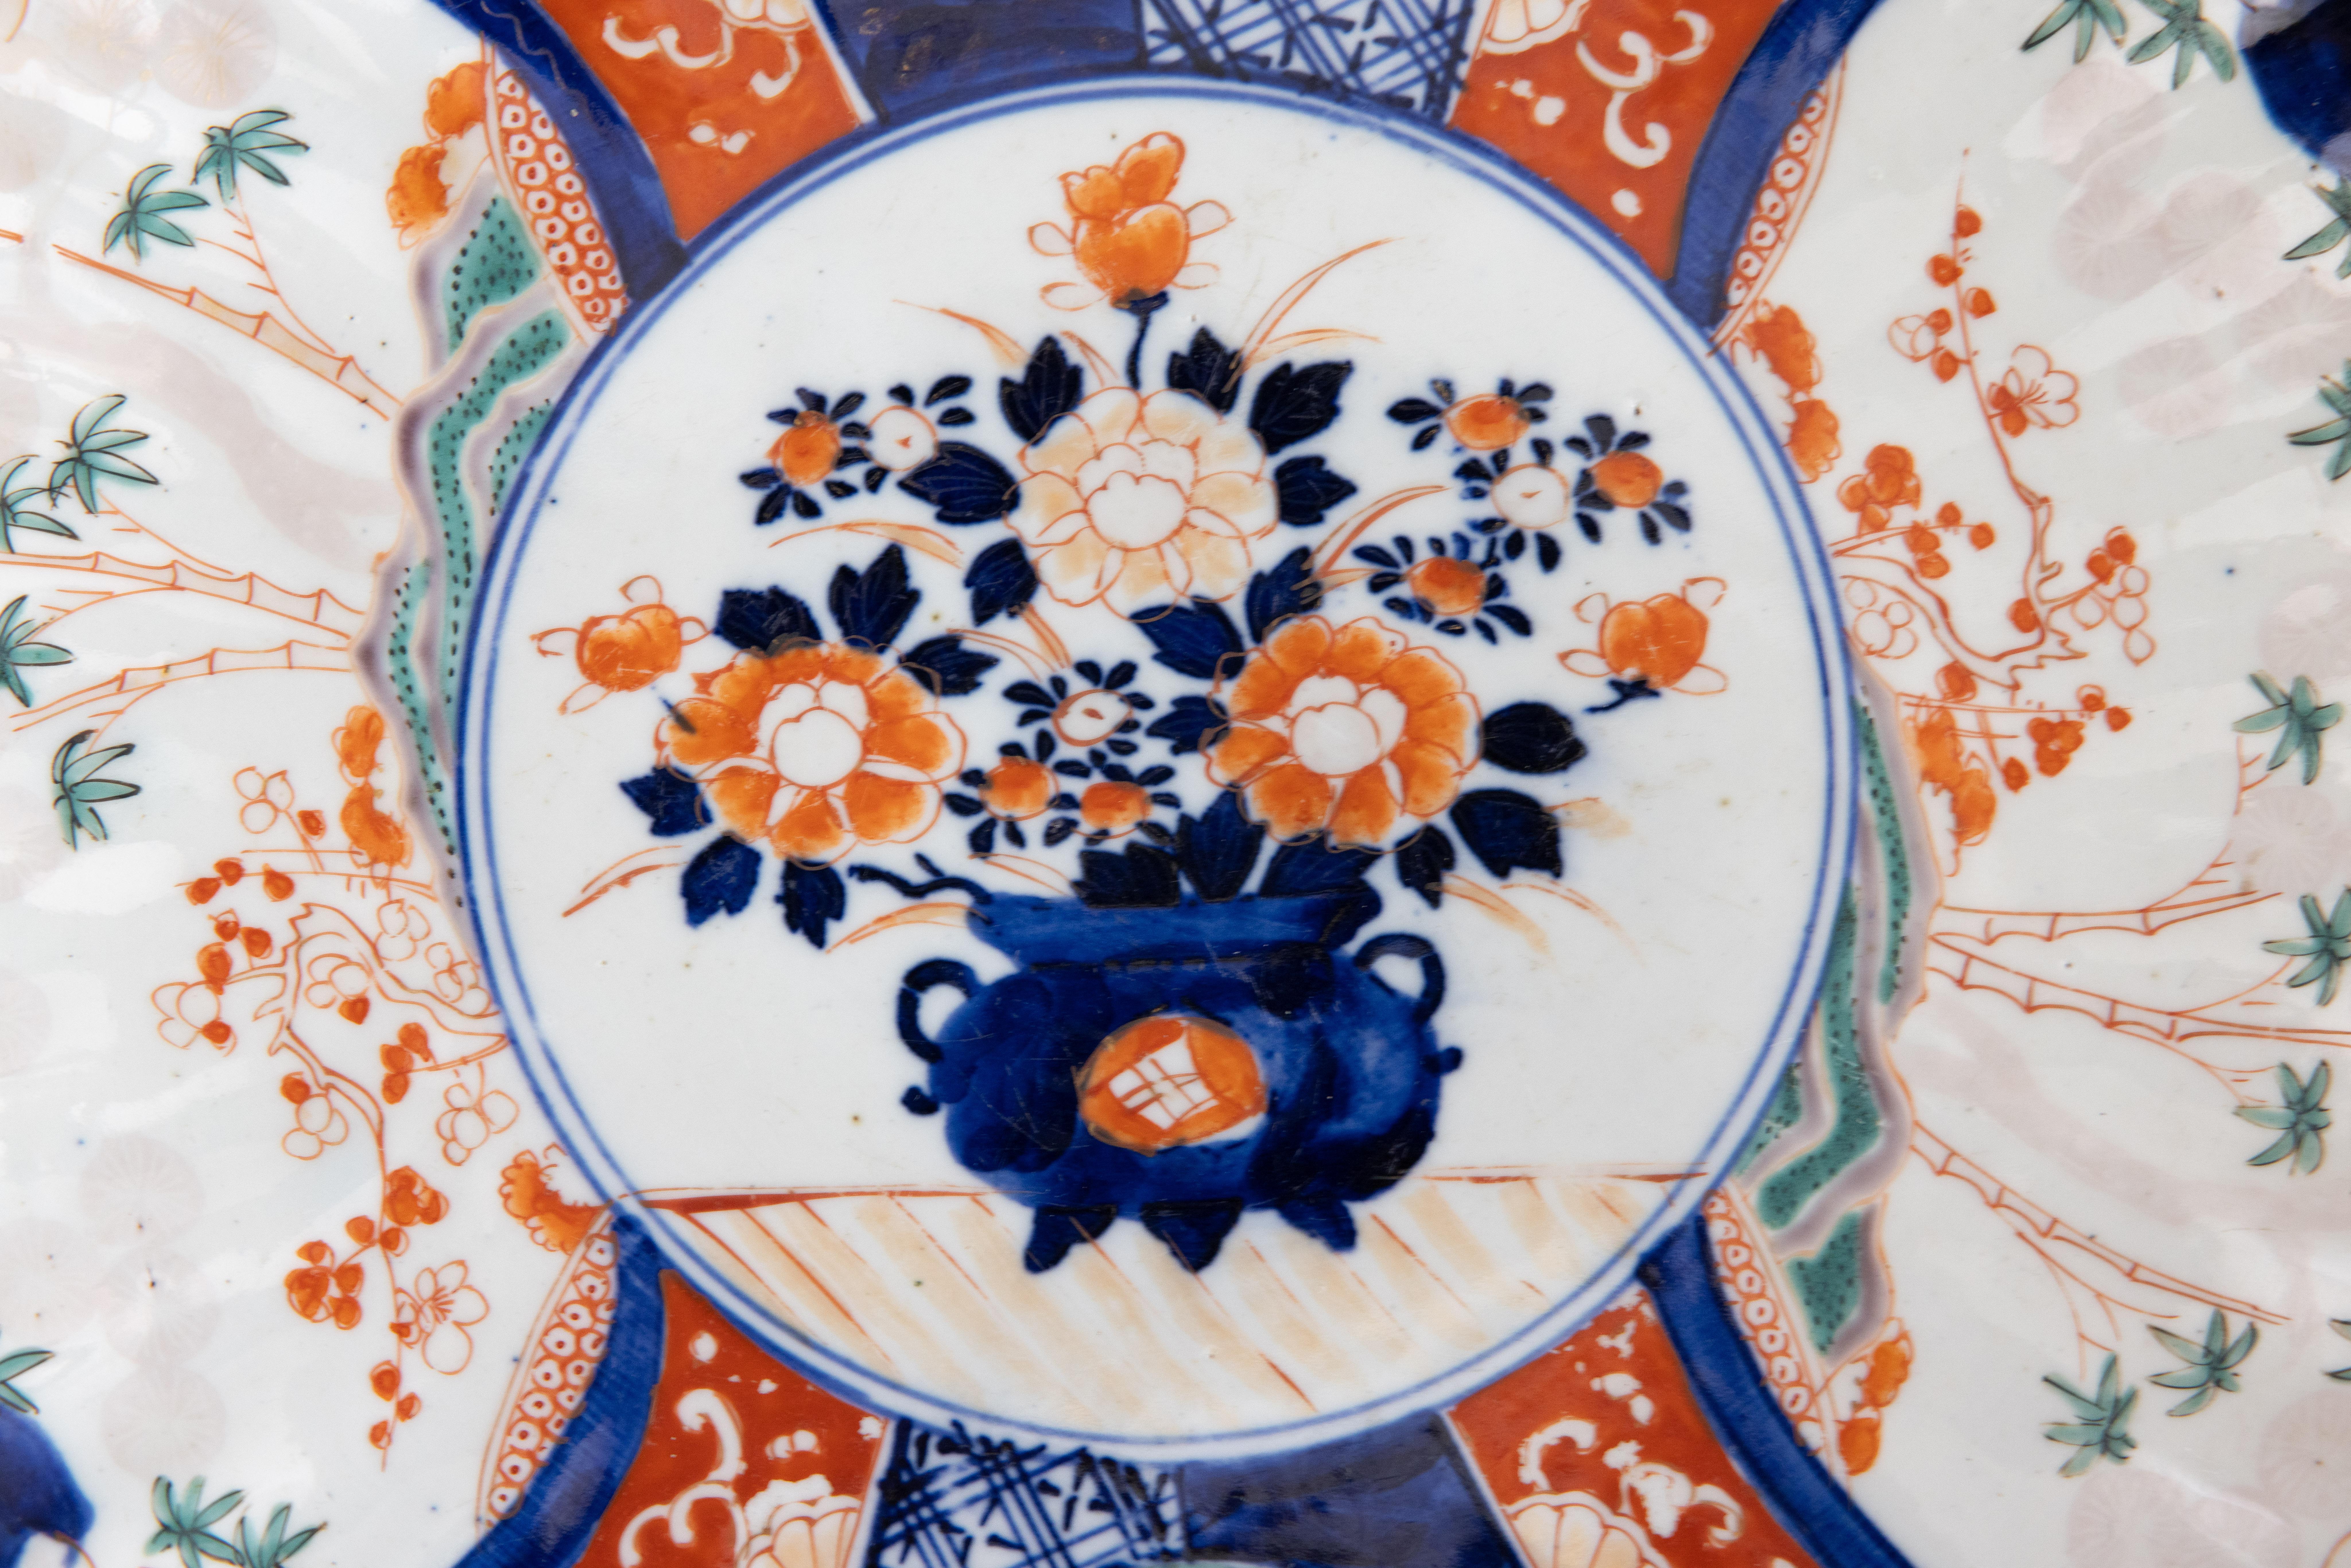 A gorgeous 19th-Century Japanese Imari porcelain charger with a hand painted floral design in the traditional Imari colors. This fine large plate has lovely scalloped edges and is quite heavy, weighing over 2 1/2 lbs. It displays beautifully,